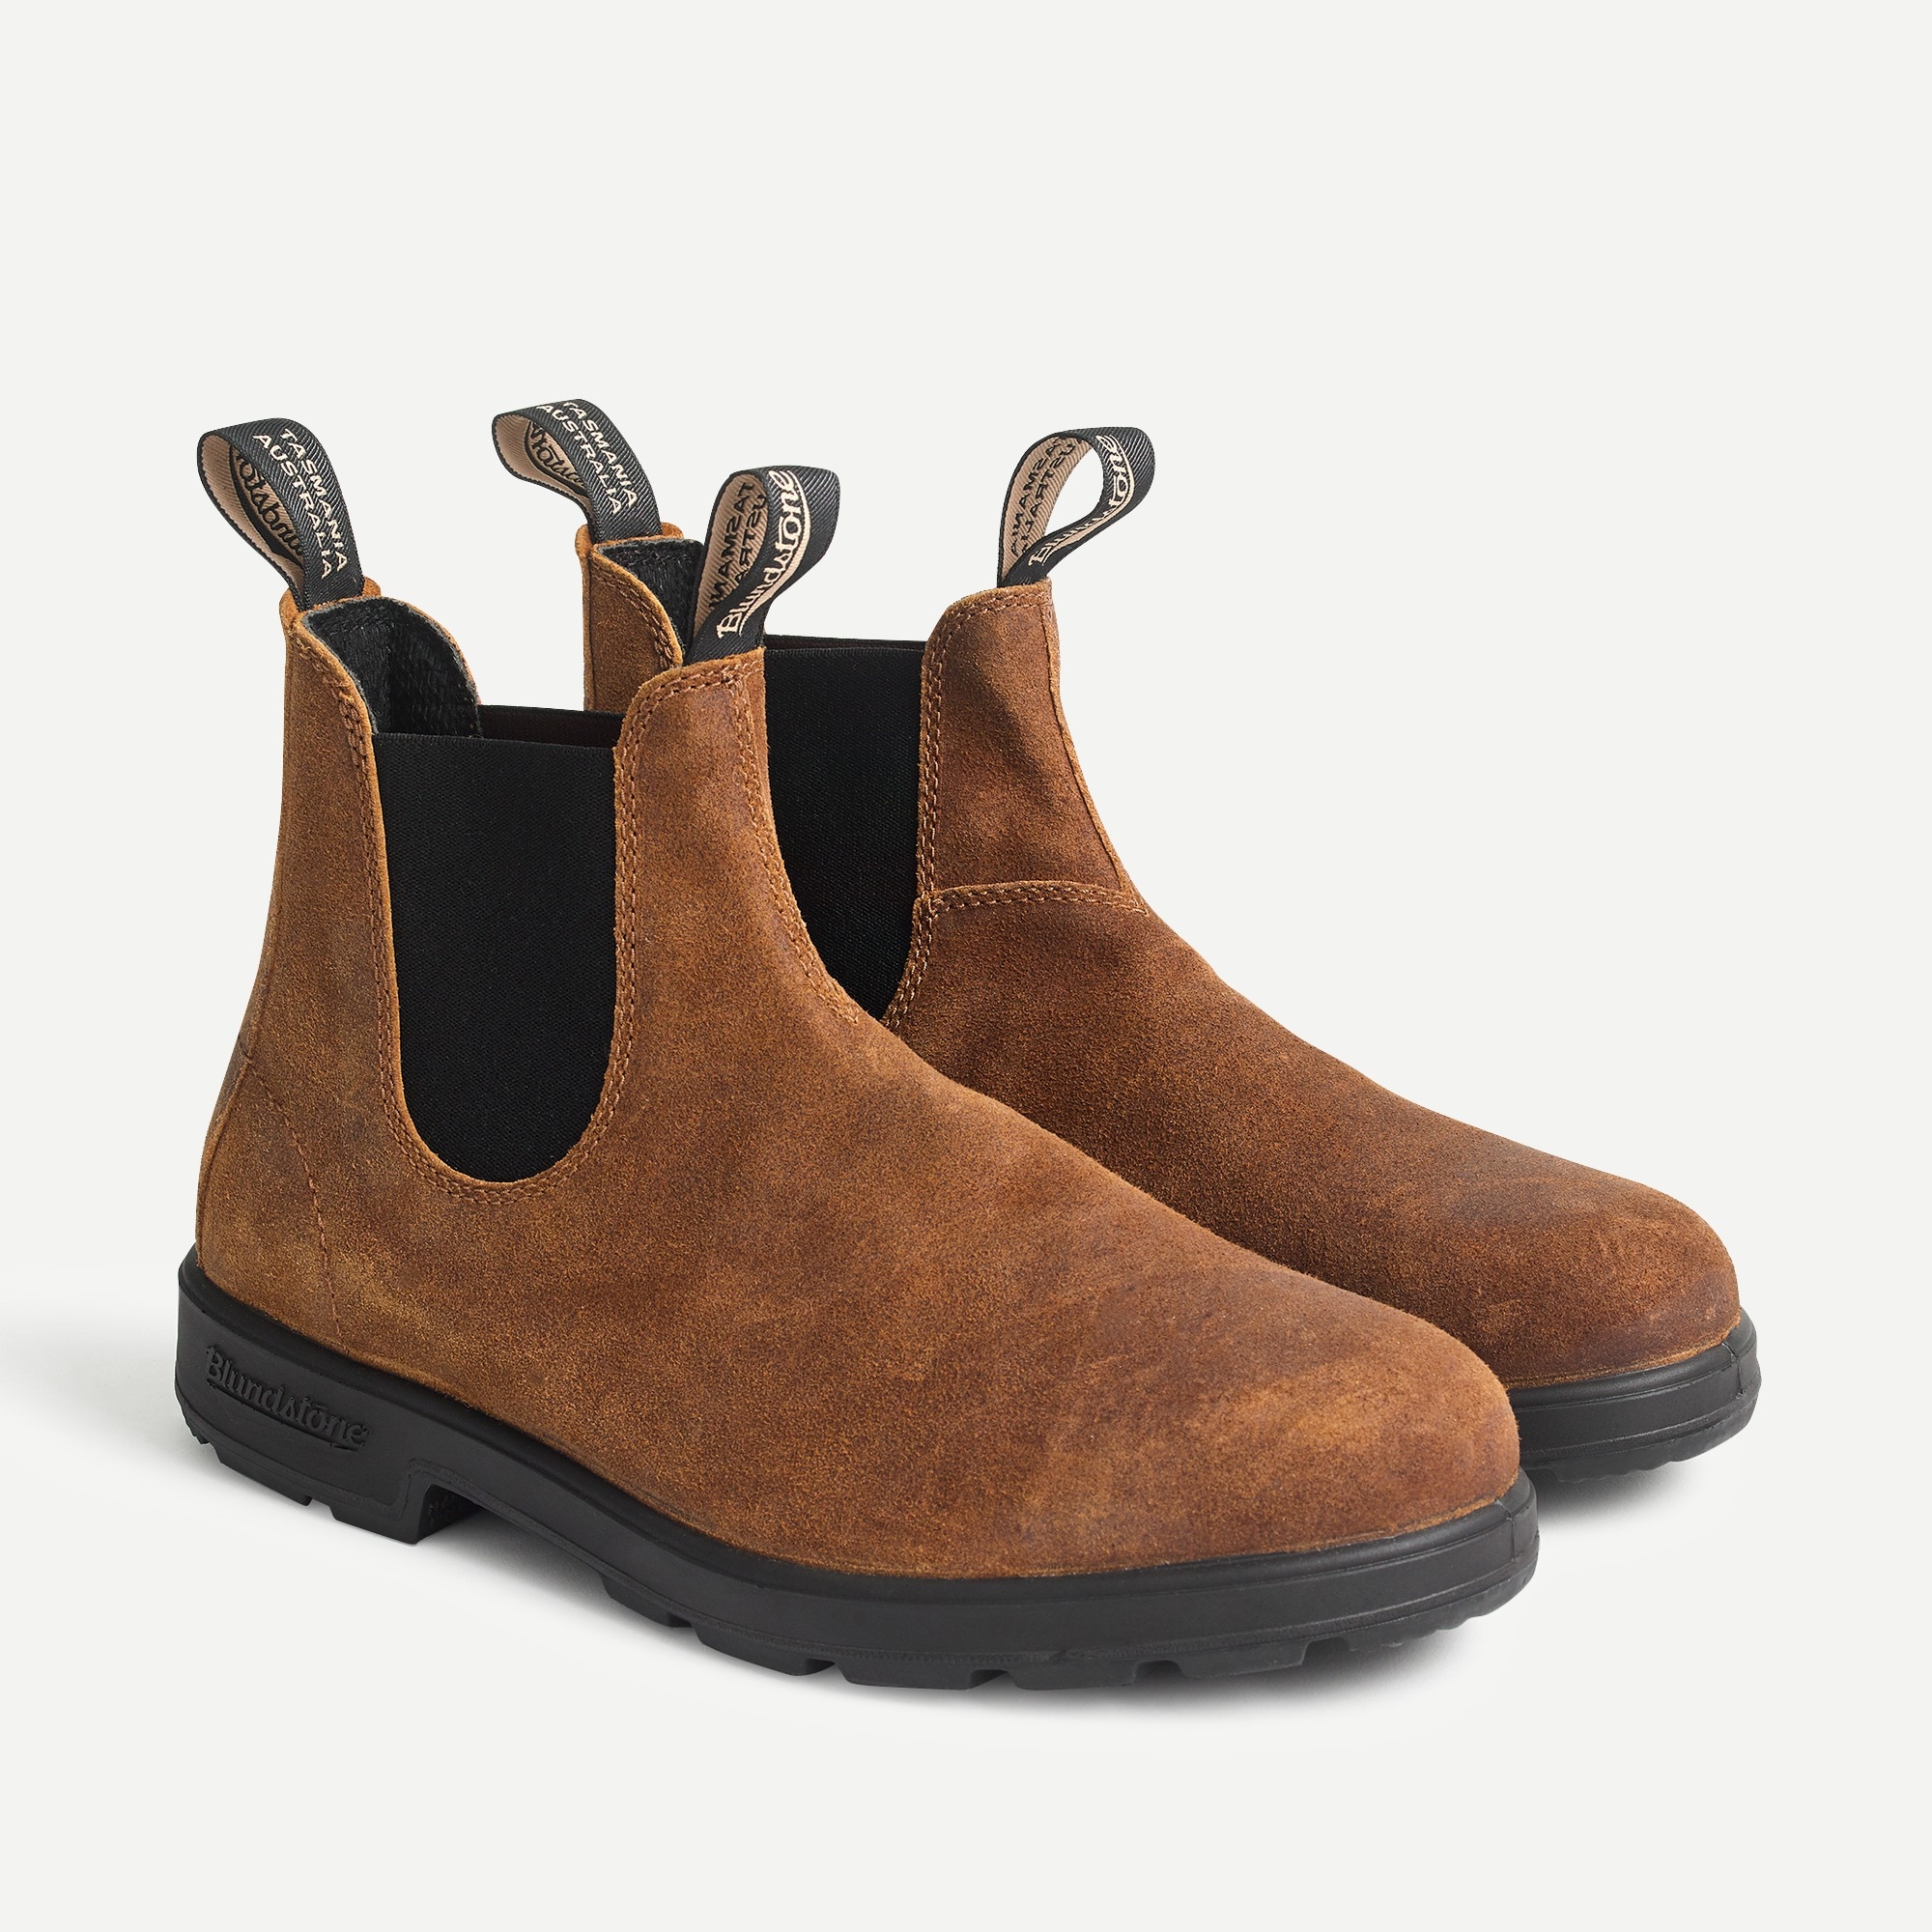 blundstone similar boots